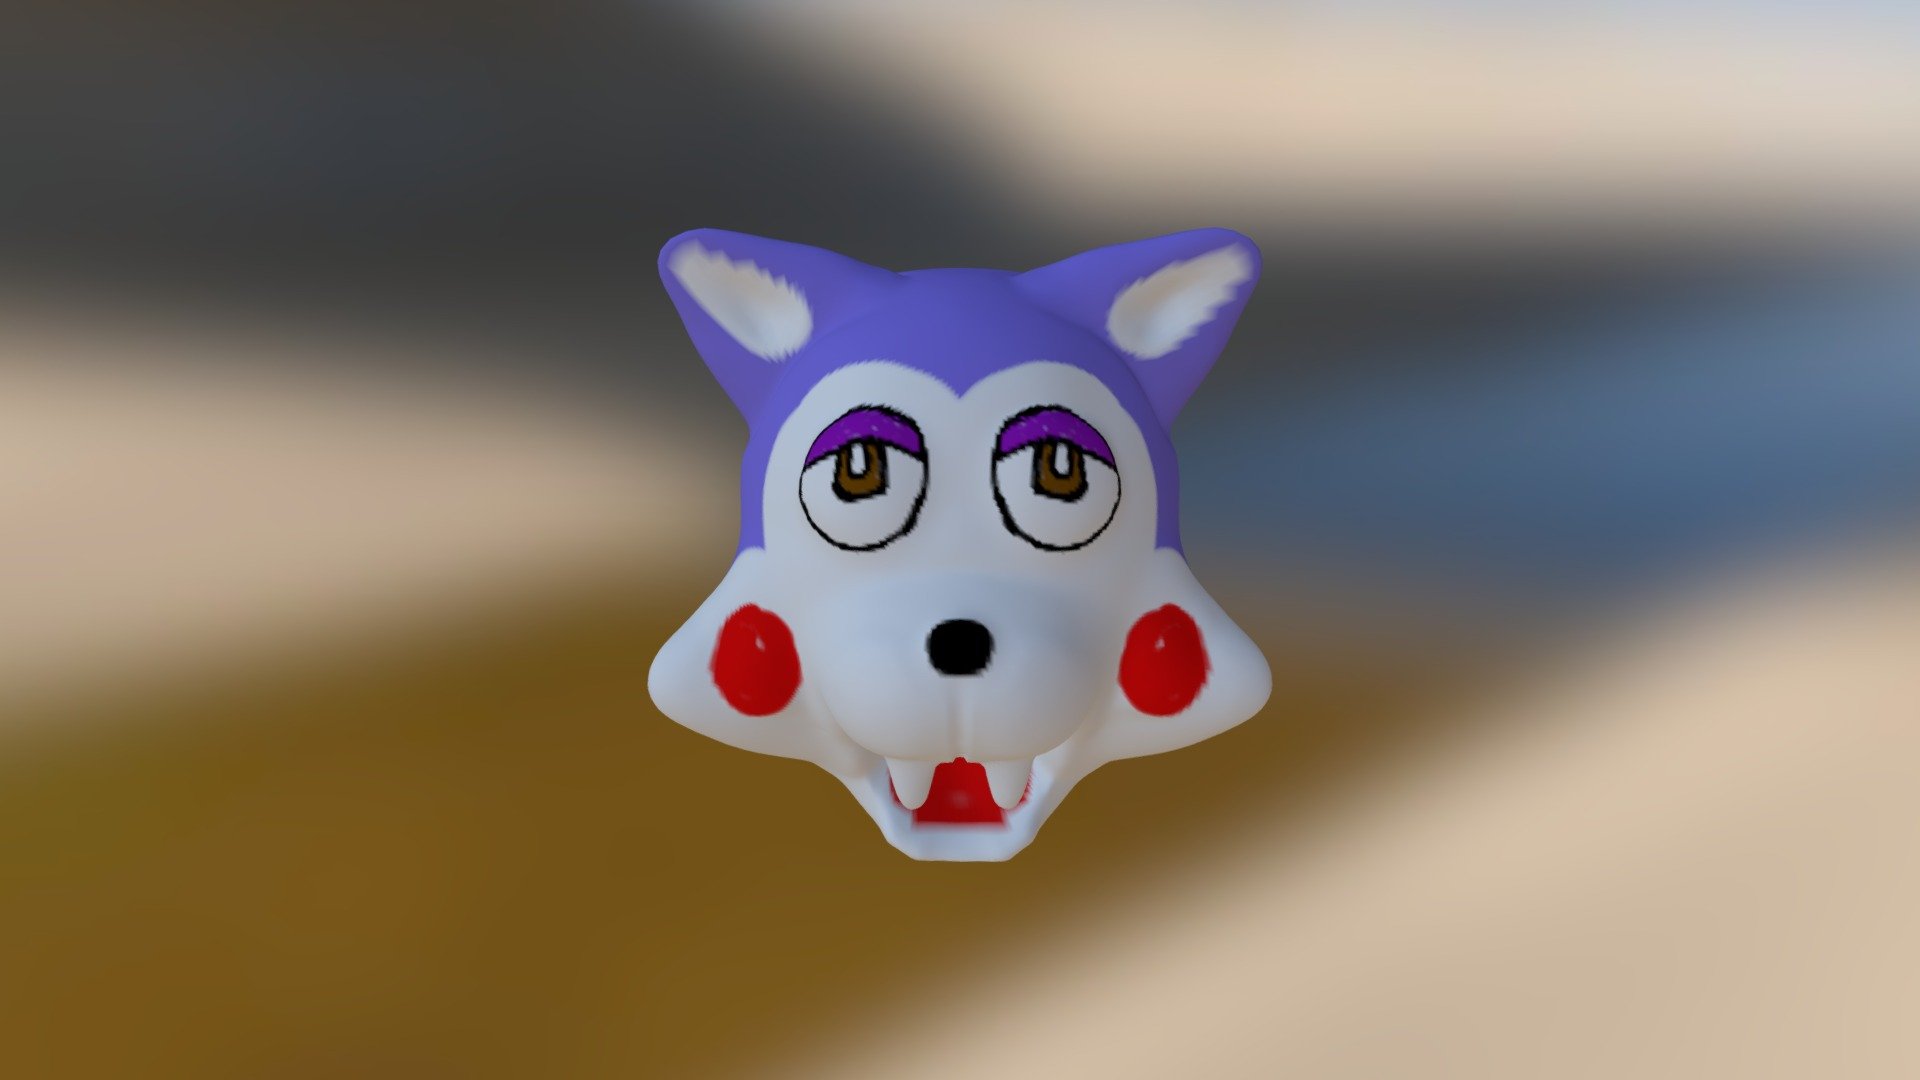 Five nights at Candy's - LowPoly CandytheCat model by BaxtheBat on